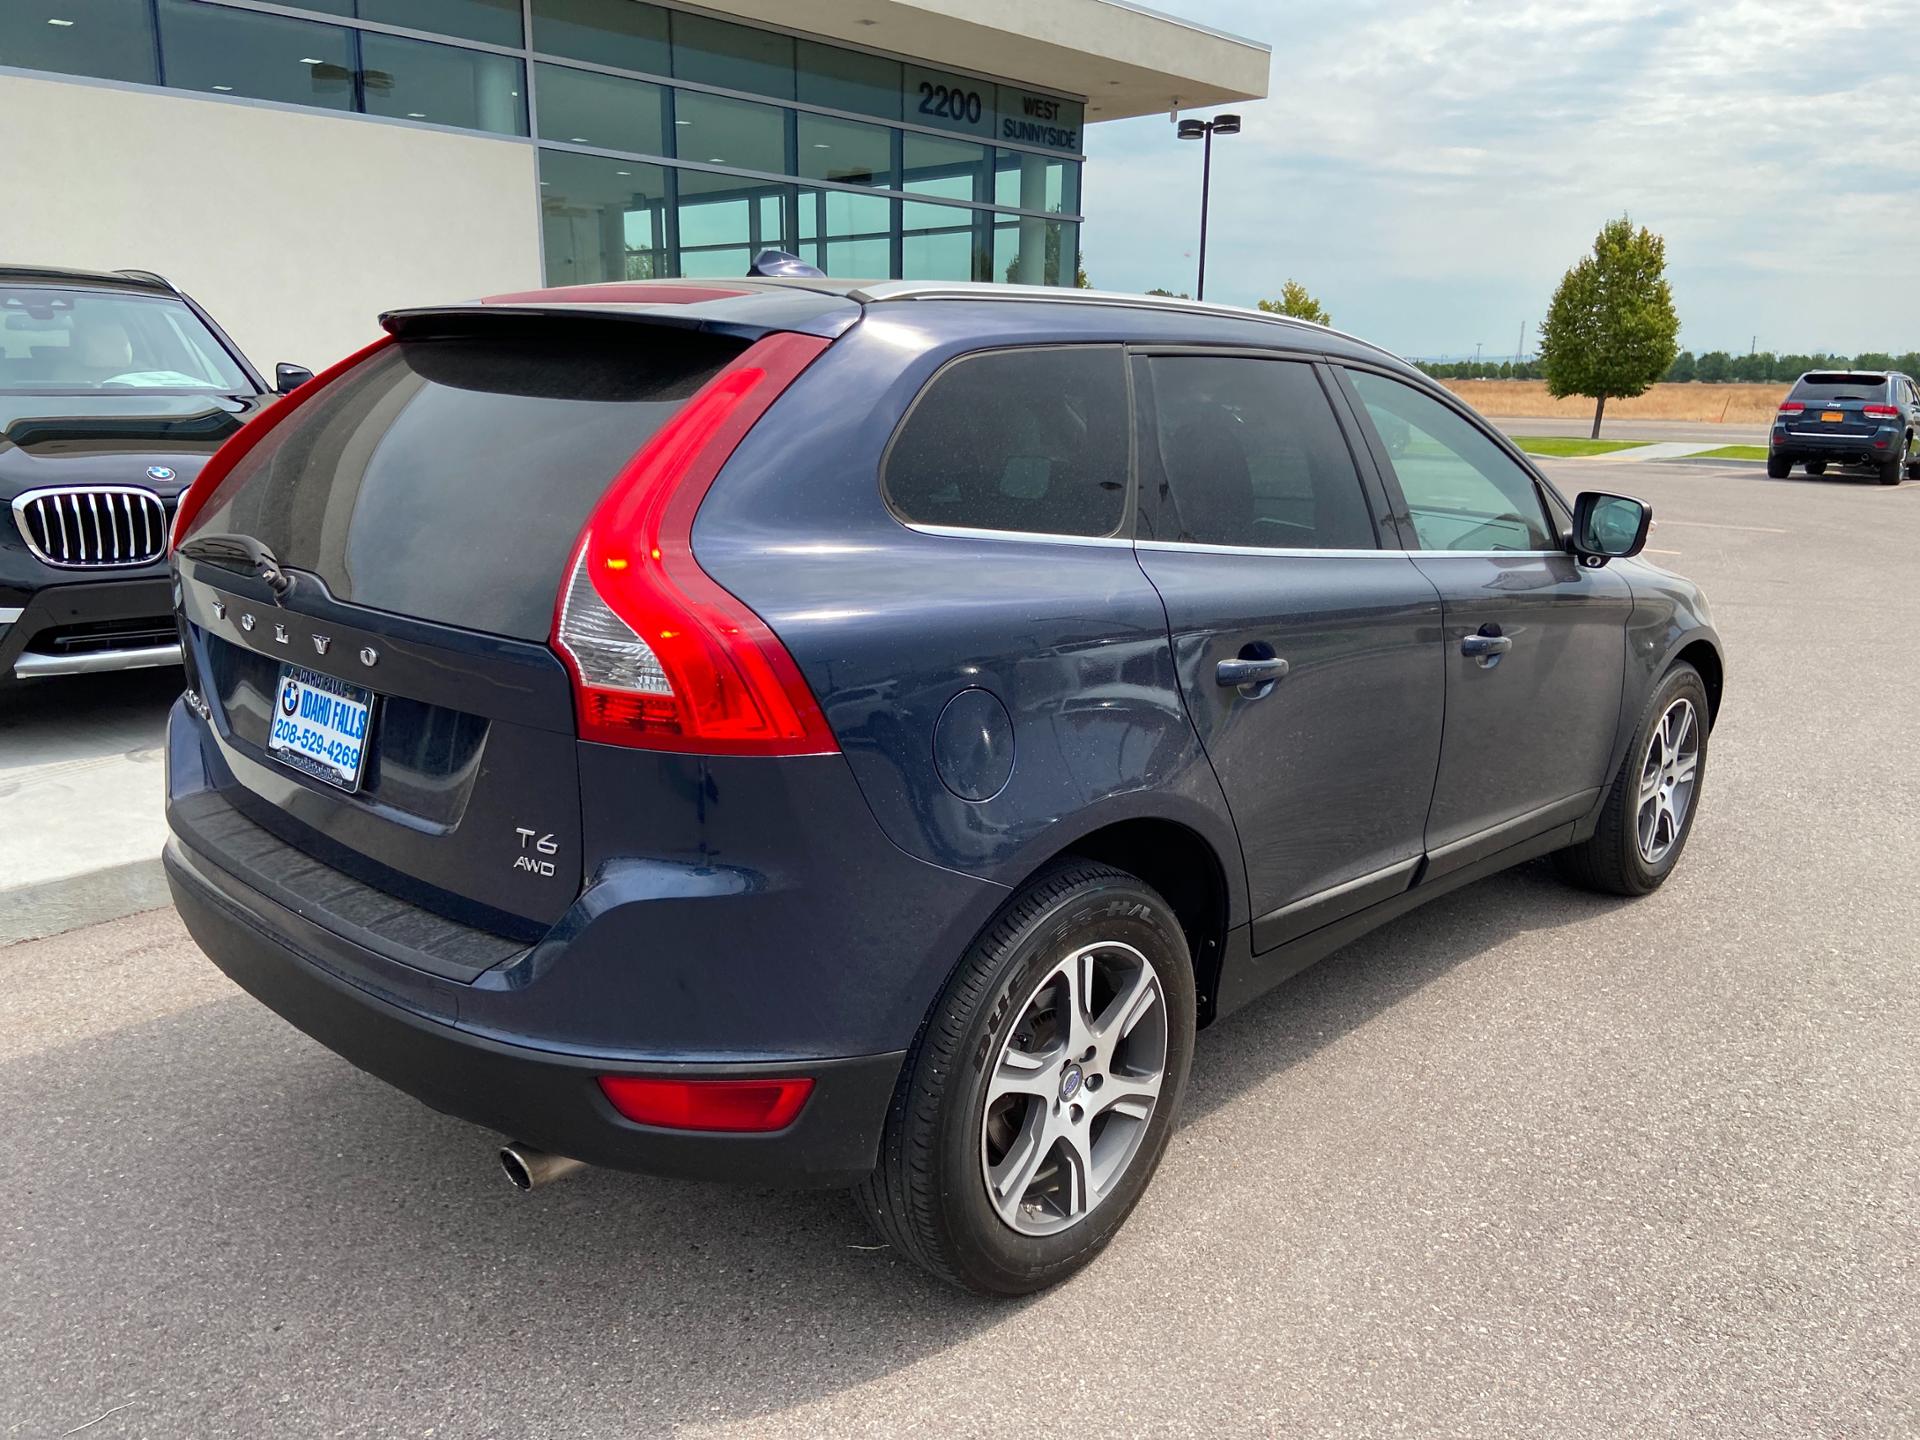 2013 Volvo Xc60 3.2 2013 Volvo XC60 now on sale in